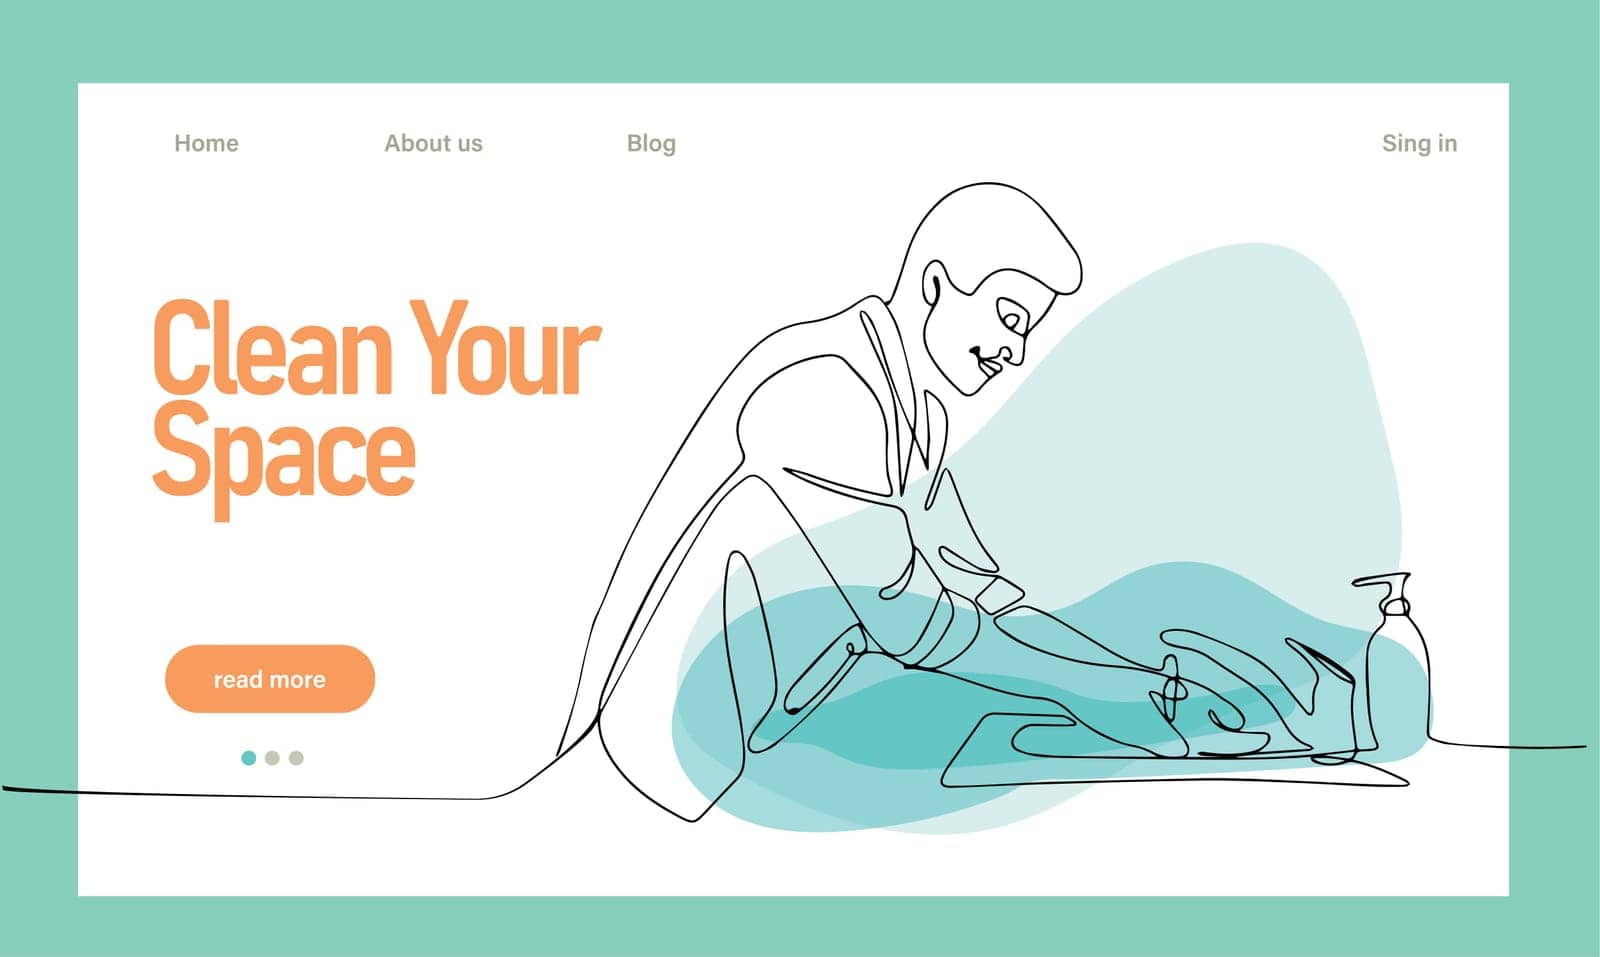 Home cleaning service landing page design concept, illustration of janitors with cleaning tools by milastokerpro